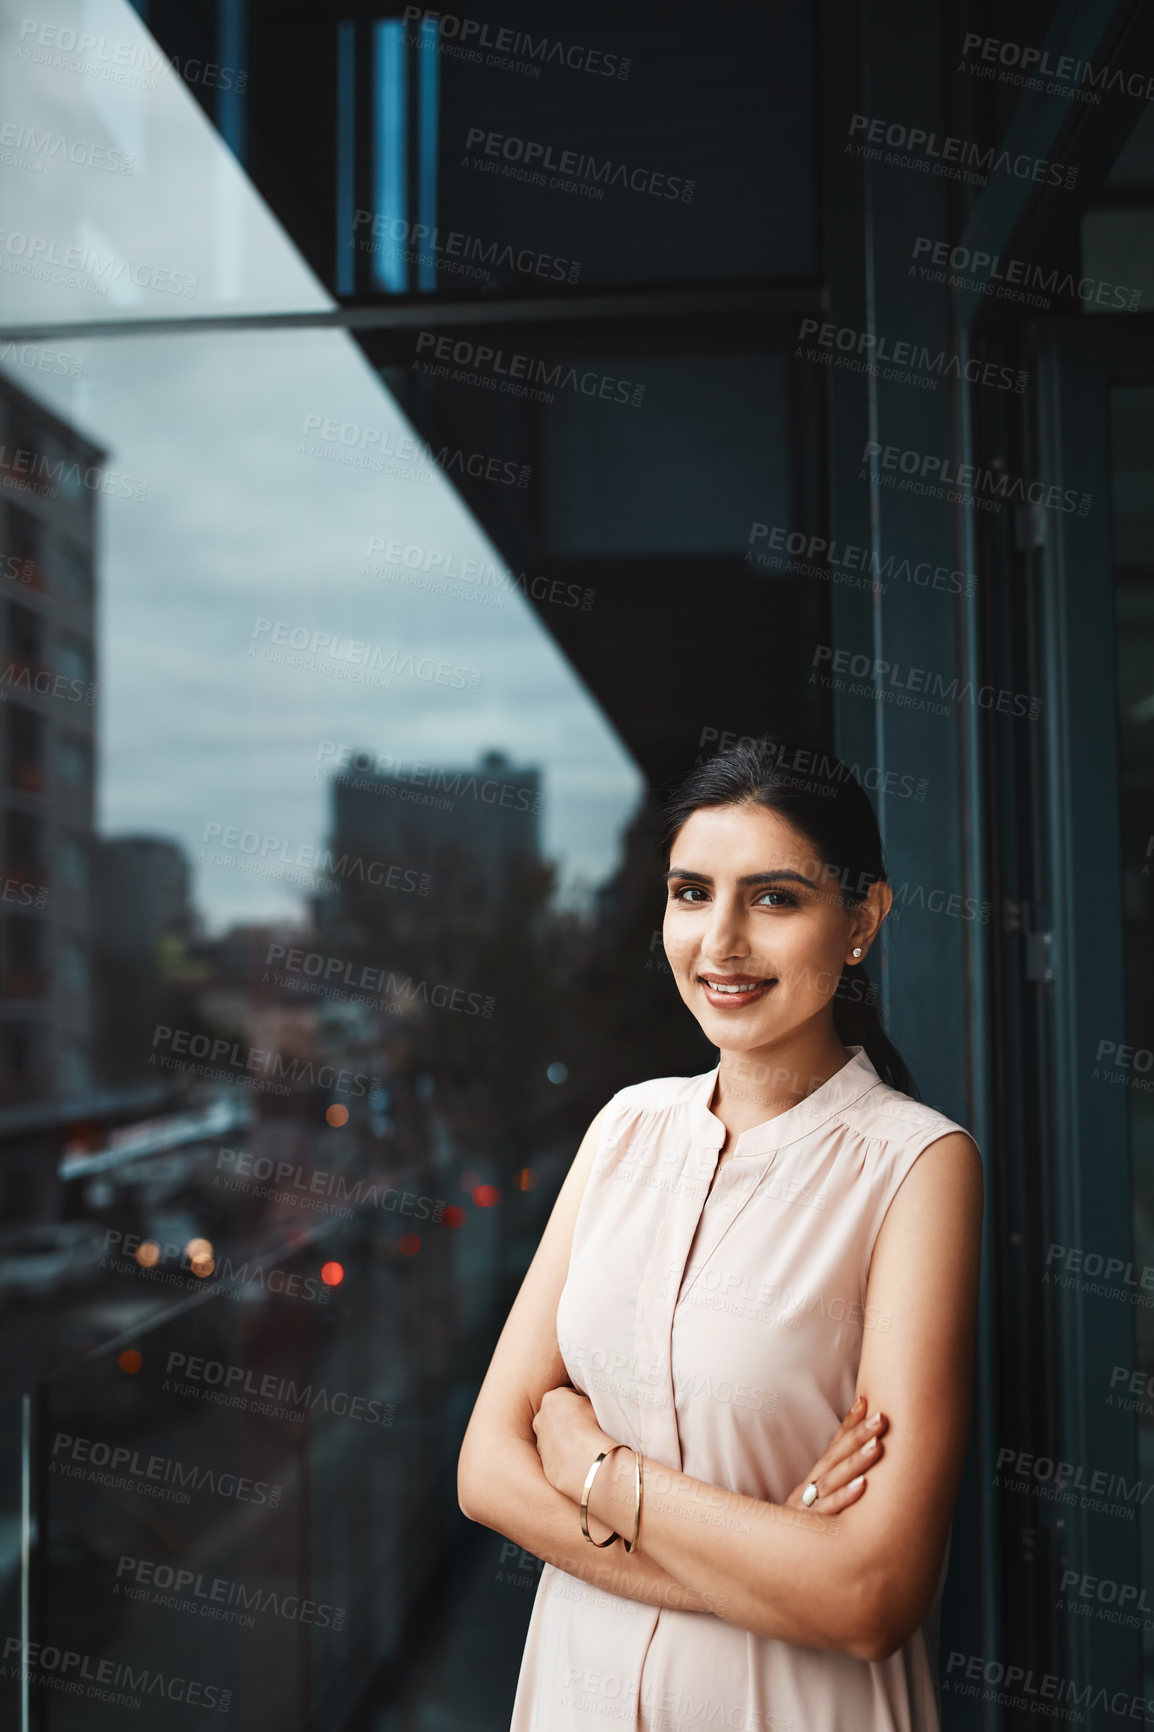 Buy stock photo Portrait of a young businesswoman standing on the office balcony